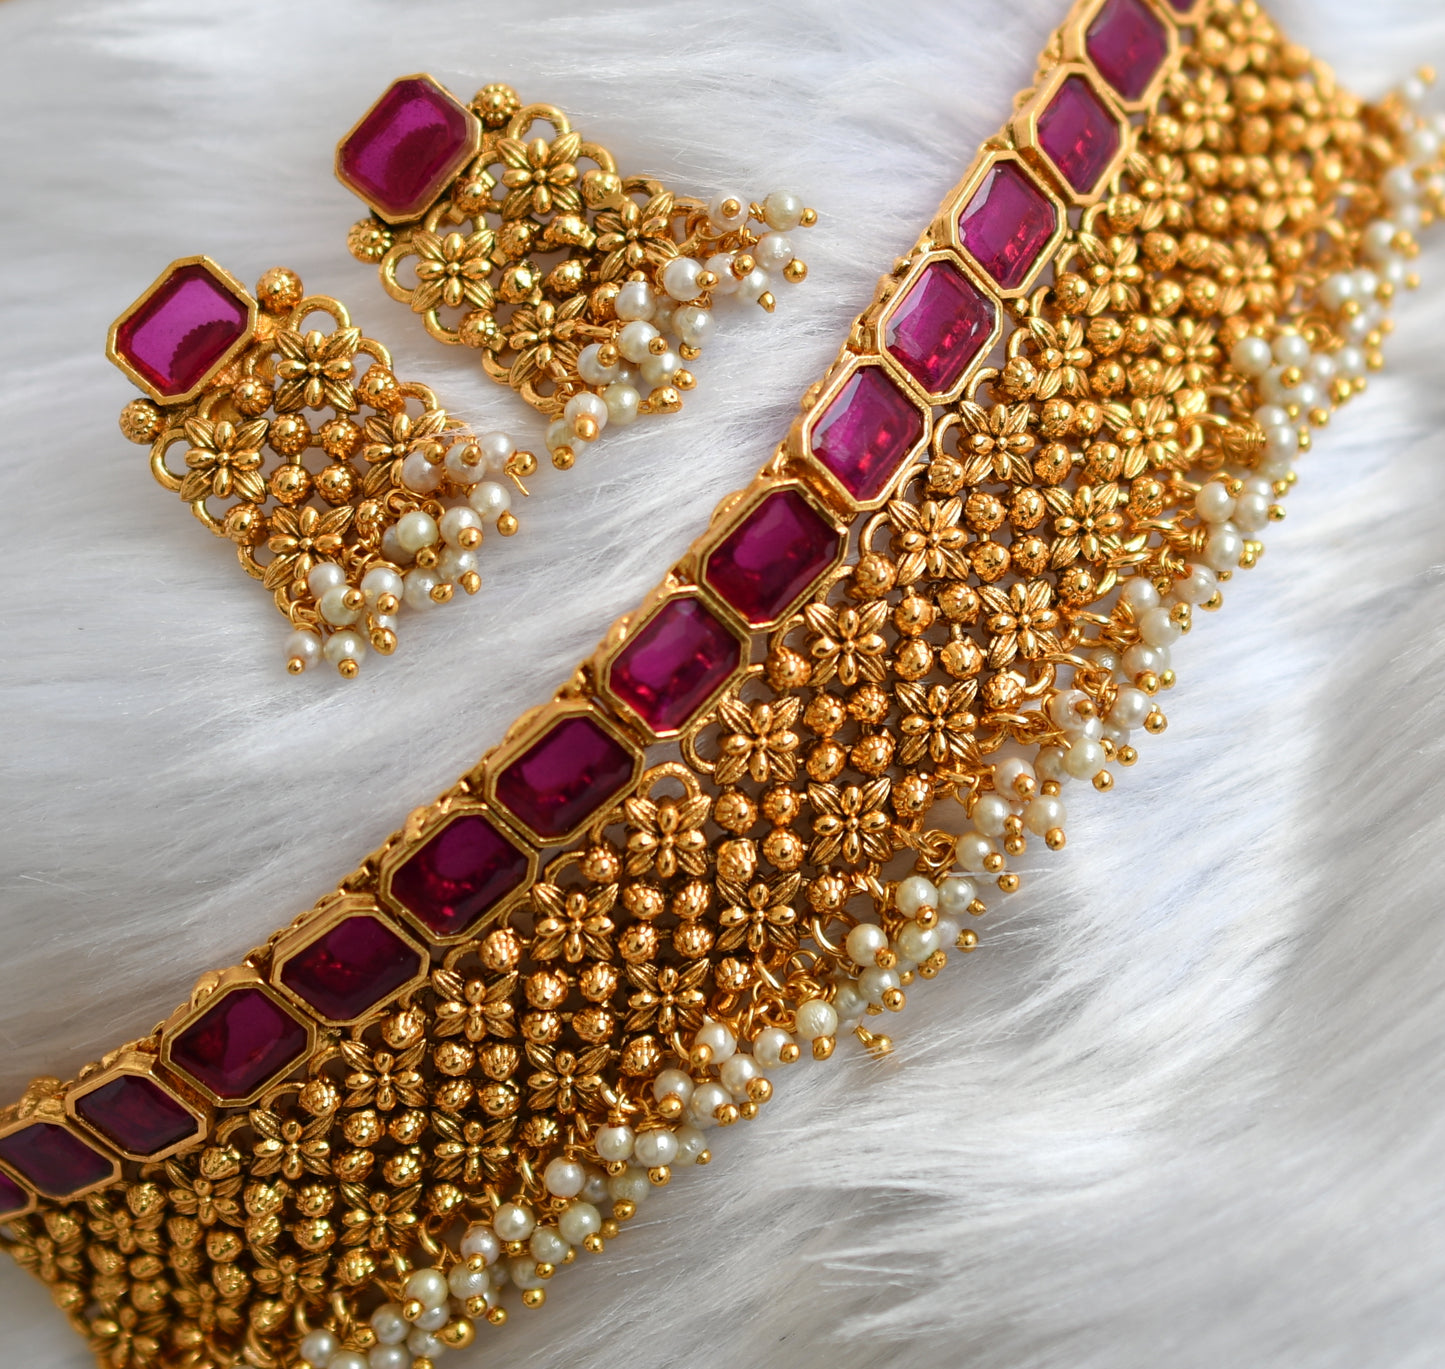 Antique gold tone pearl cluster ruby block stone choker necklace set dj-38710